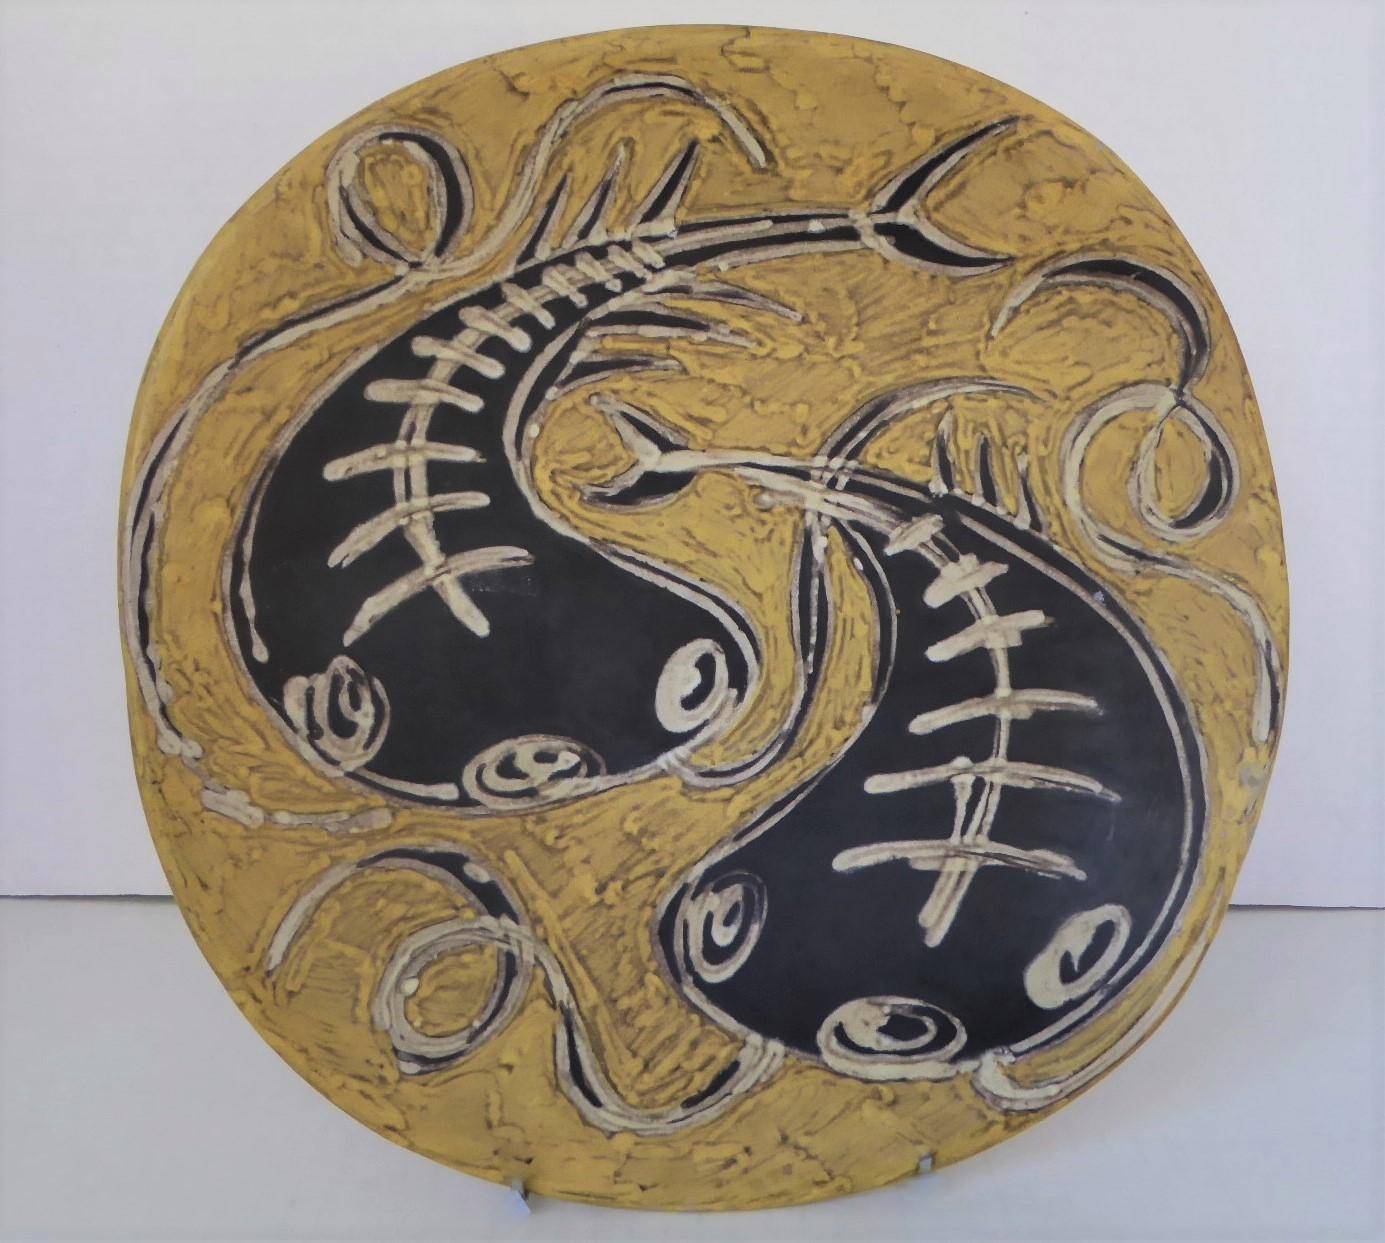 Mid-Century Modern Decorative Plate by Hungarian artist Gorka Livia (1925-2011). This plate like all of her ceramics is hand thrown and has a freeform feel due the uneven shape of the vessel which is almost oblong. The color is mustard yellow